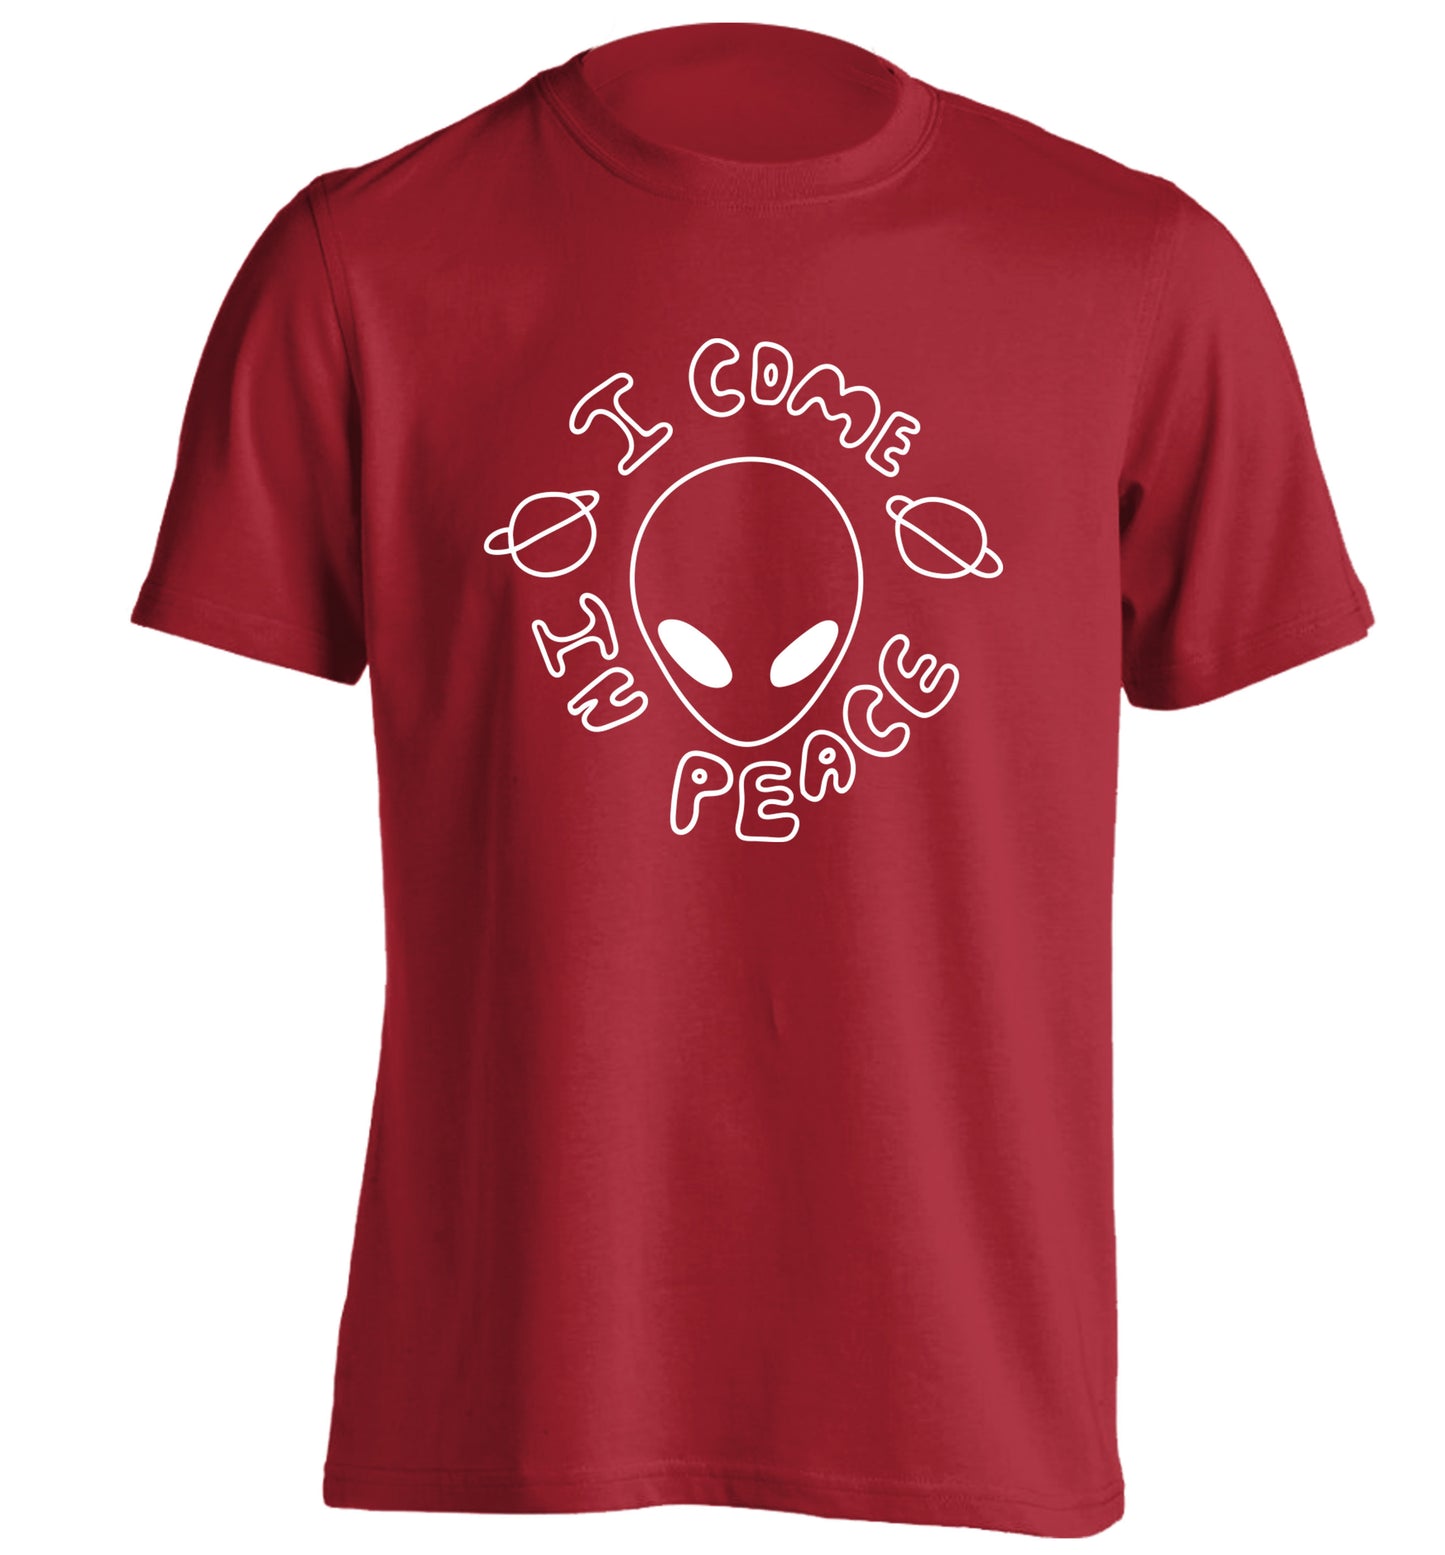 I come in peace adults unisex red Tshirt 2XL